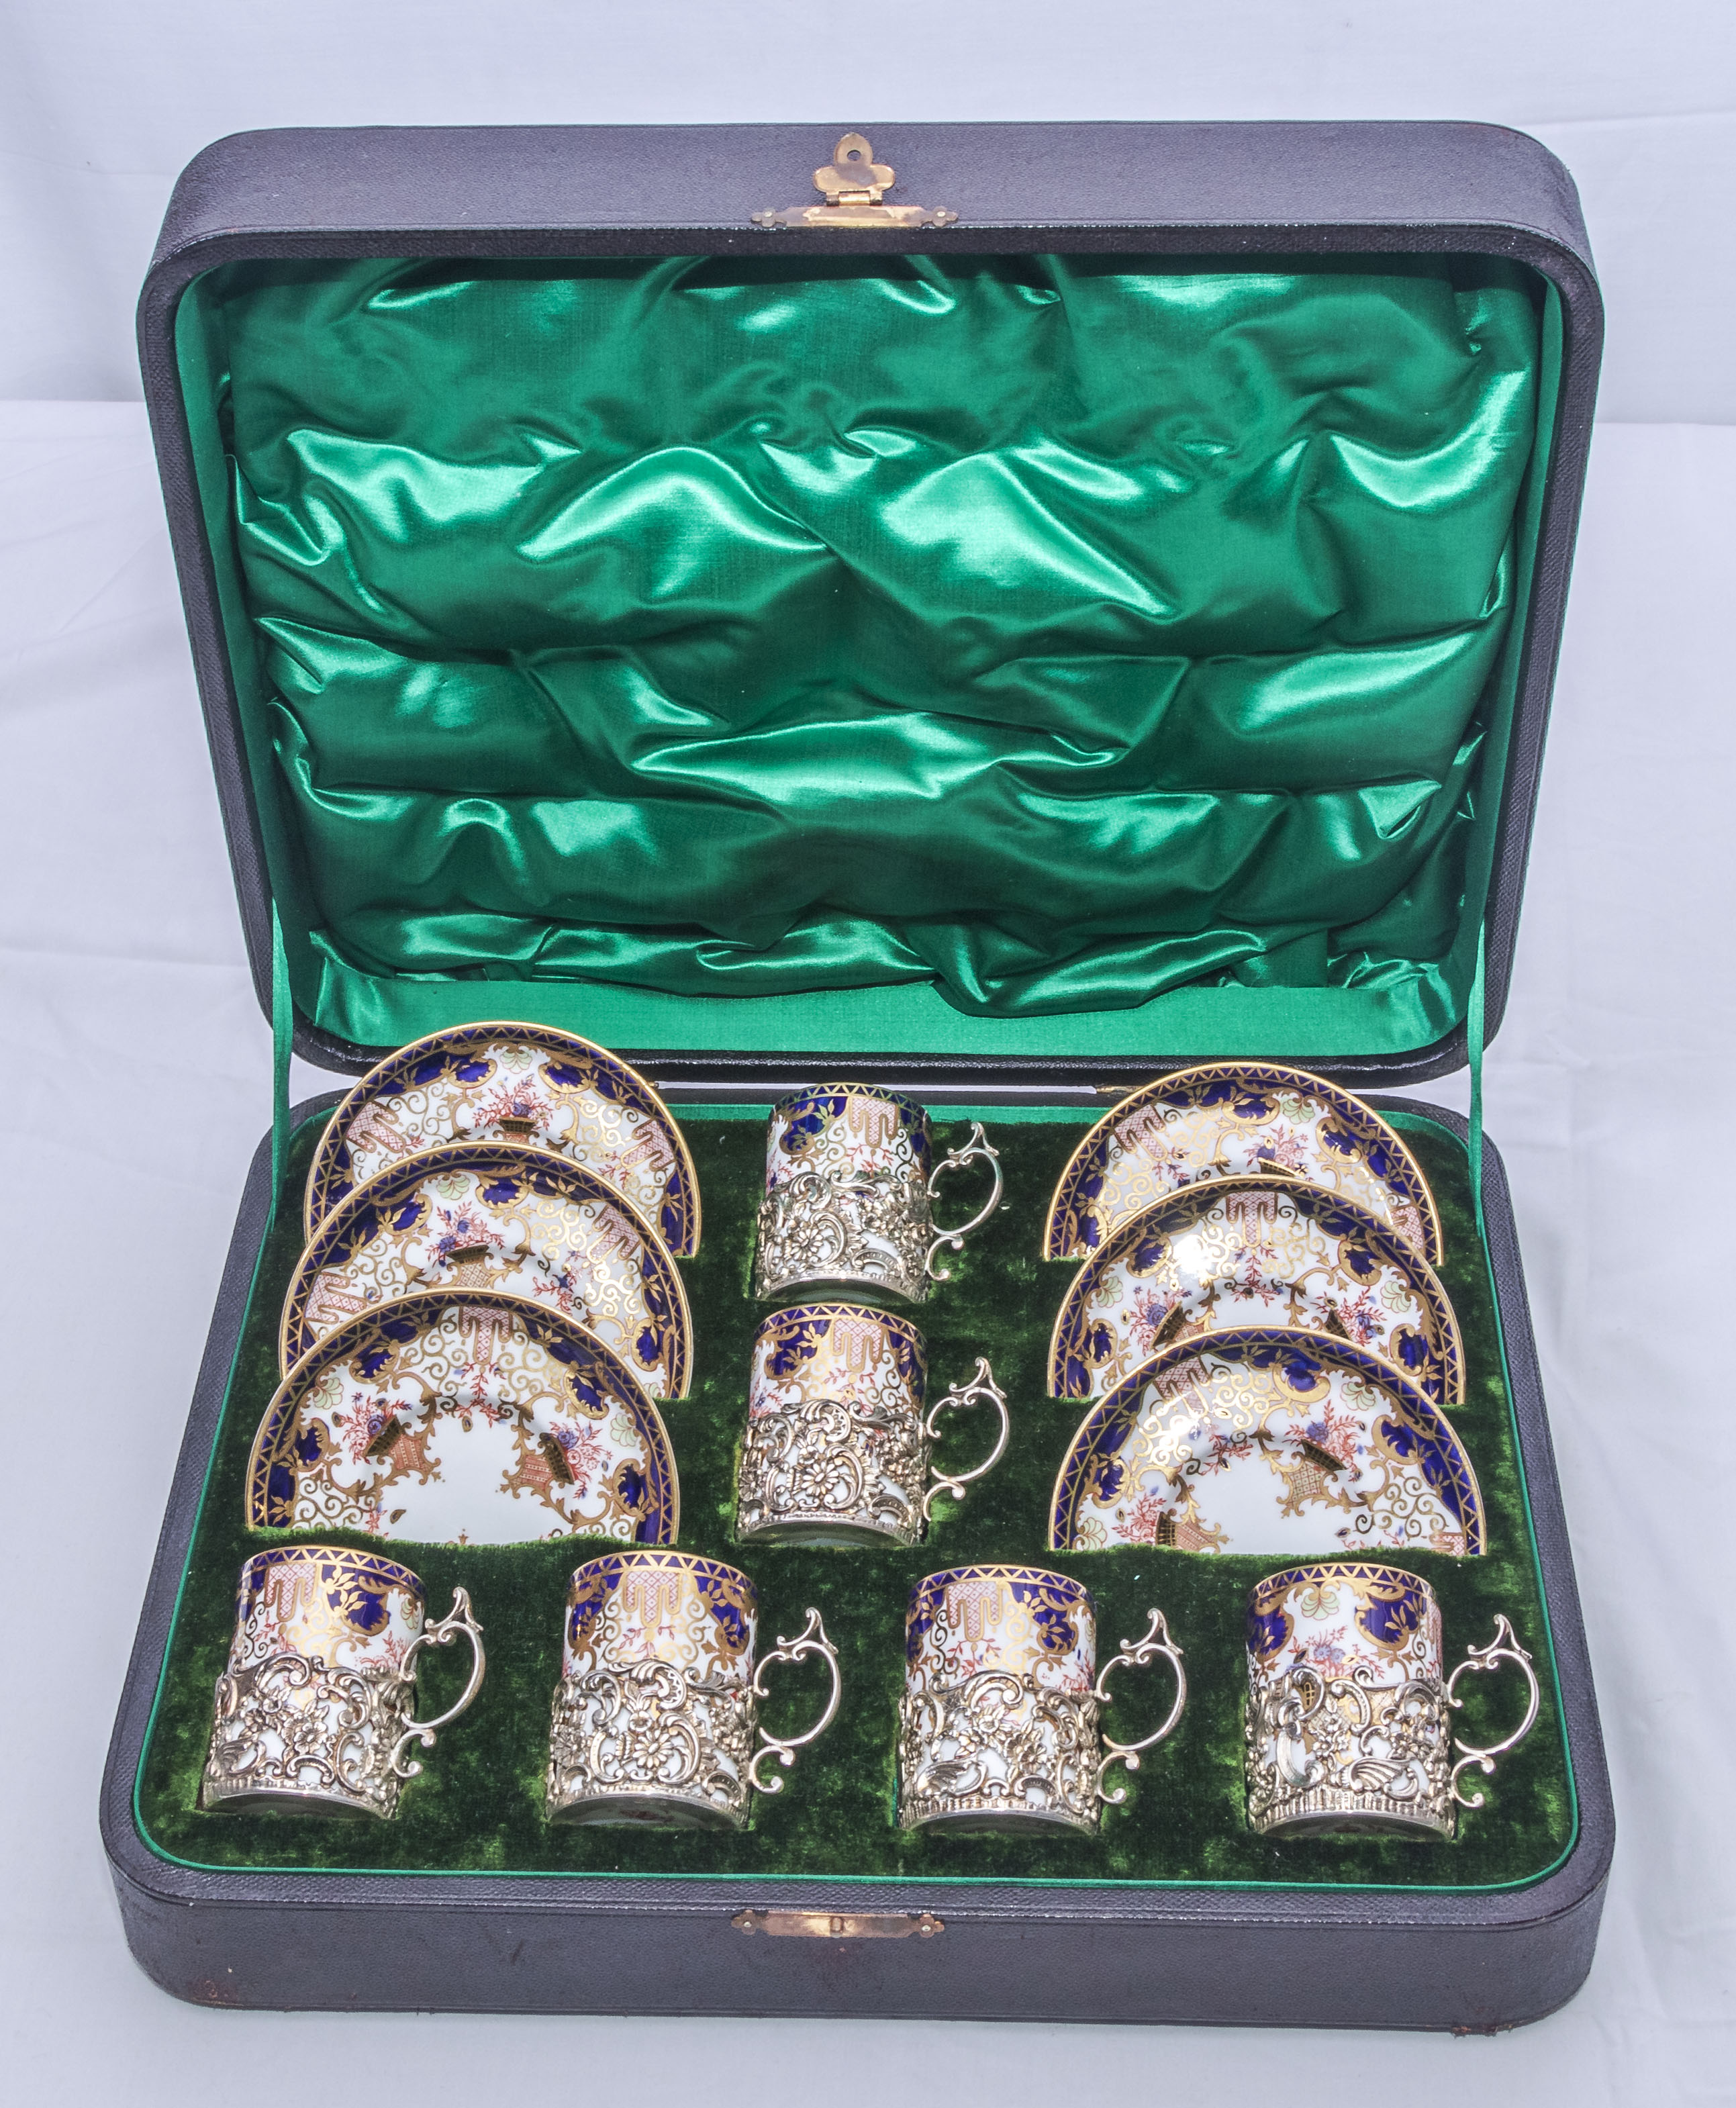 Royal Crown Derby silver mounted coffee cans and saucers in leather case - Image 3 of 4